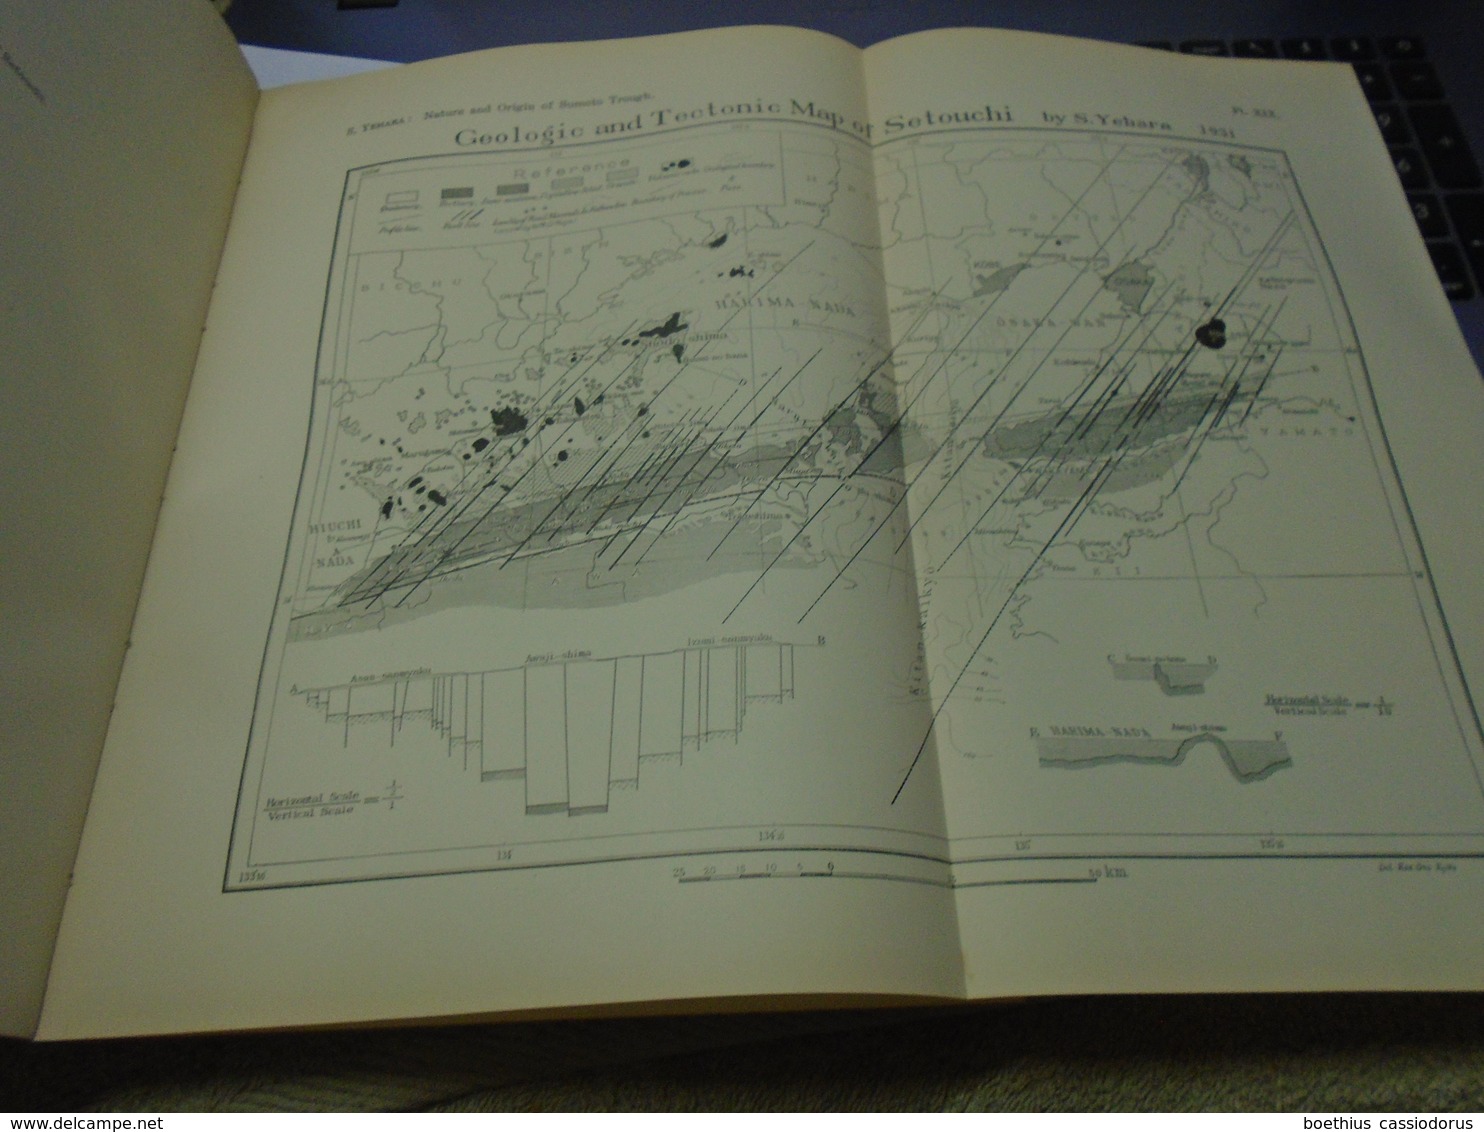 JAPANESE JOURNAL OF GEOLOGY AND GEOGRAPHY Transactions And Abstracts Vol. IX  Nos. 3 And 4 TOKYO March,1932 - Geowissenschaften